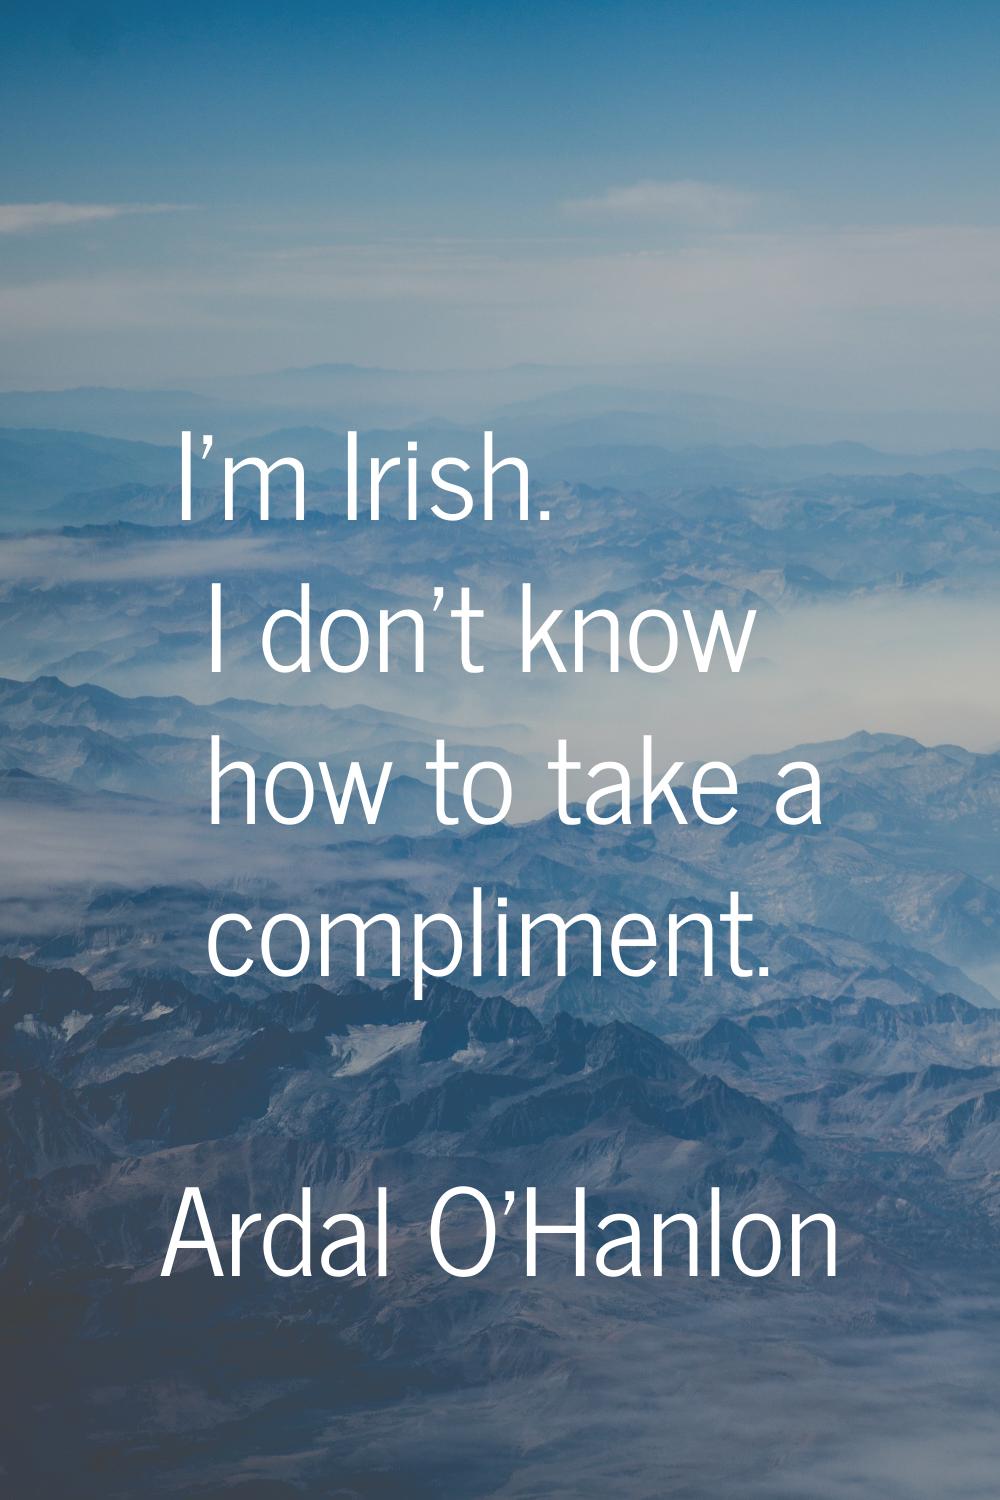 I'm Irish. I don't know how to take a compliment.